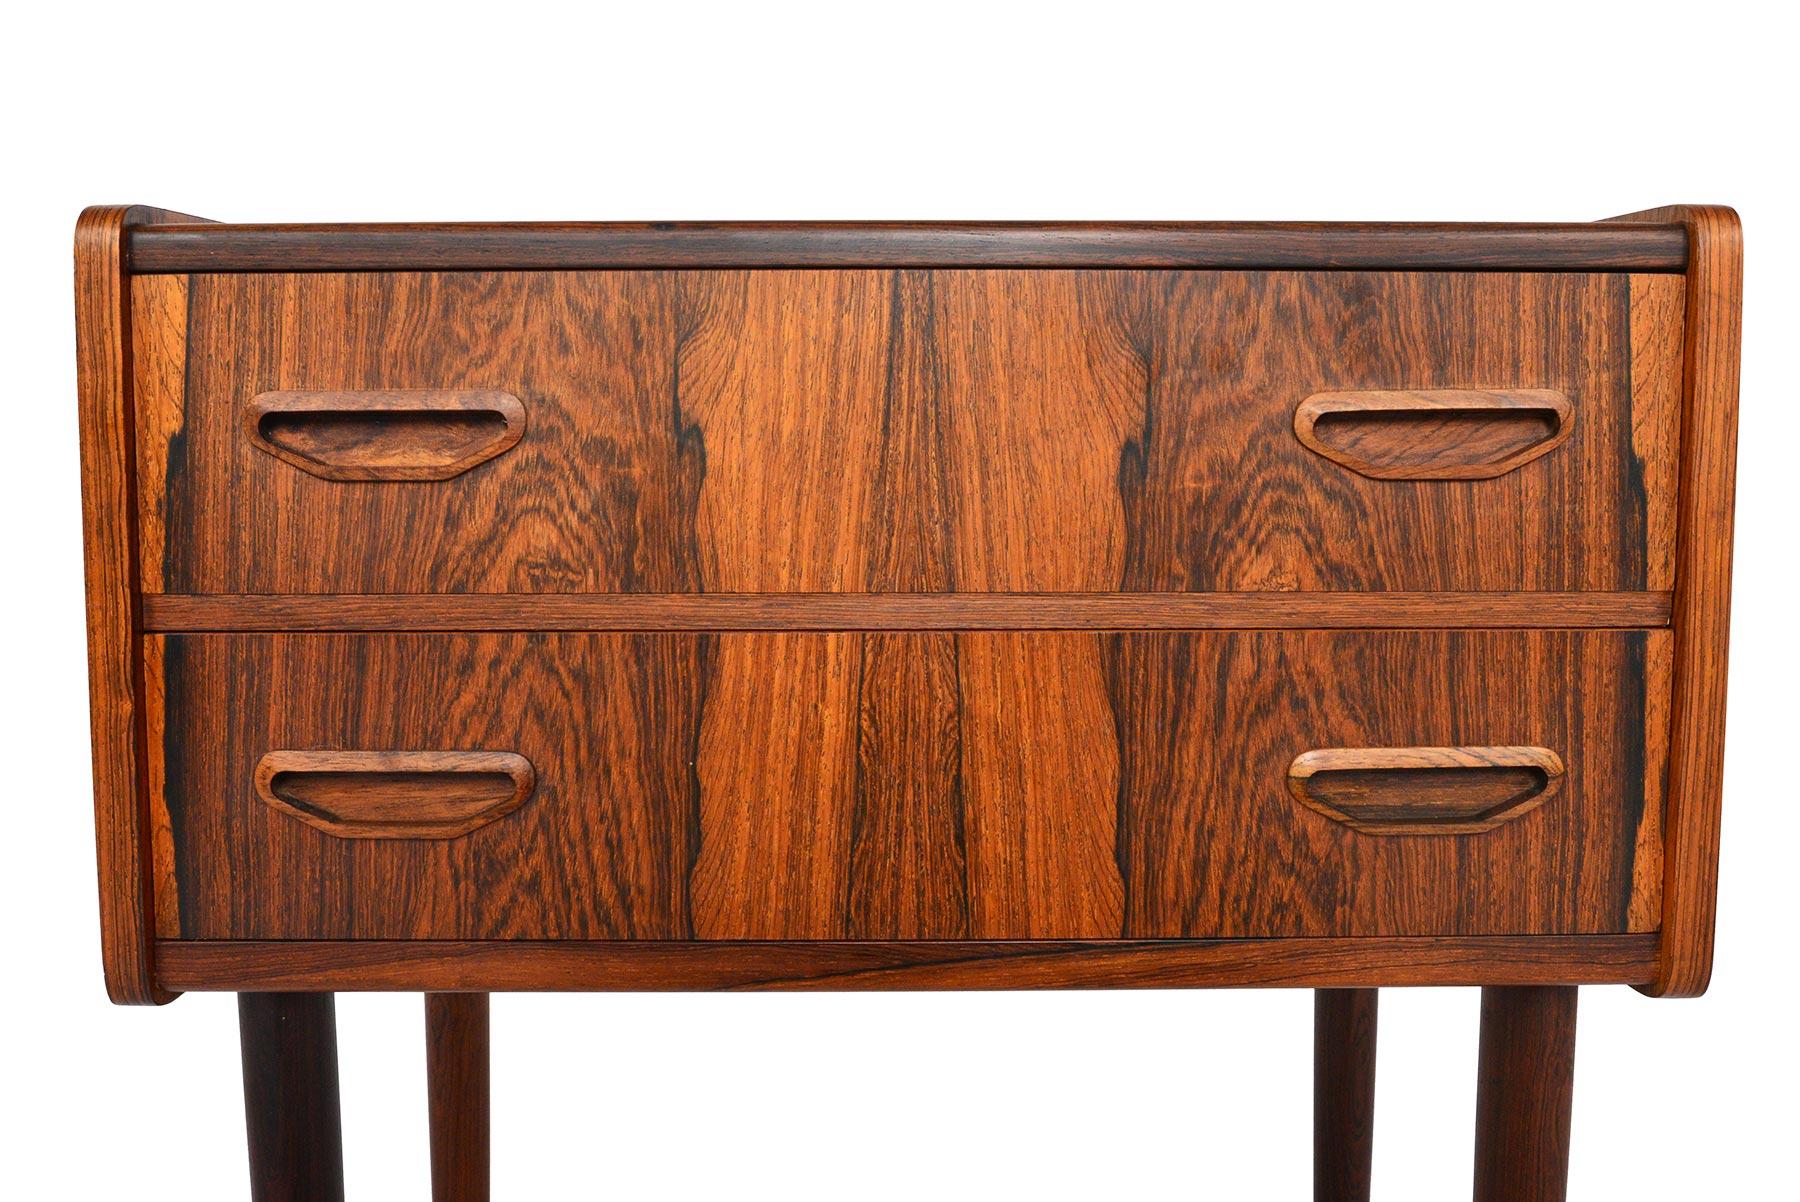 This Danish modern entry chest in rosewood is absolute perfection. A tall narrow profile houses two drawers with carved pulls. Breathtaking book- matched Brazilian rosewood woodgrain covers the case. In excellent original condition with typical wear